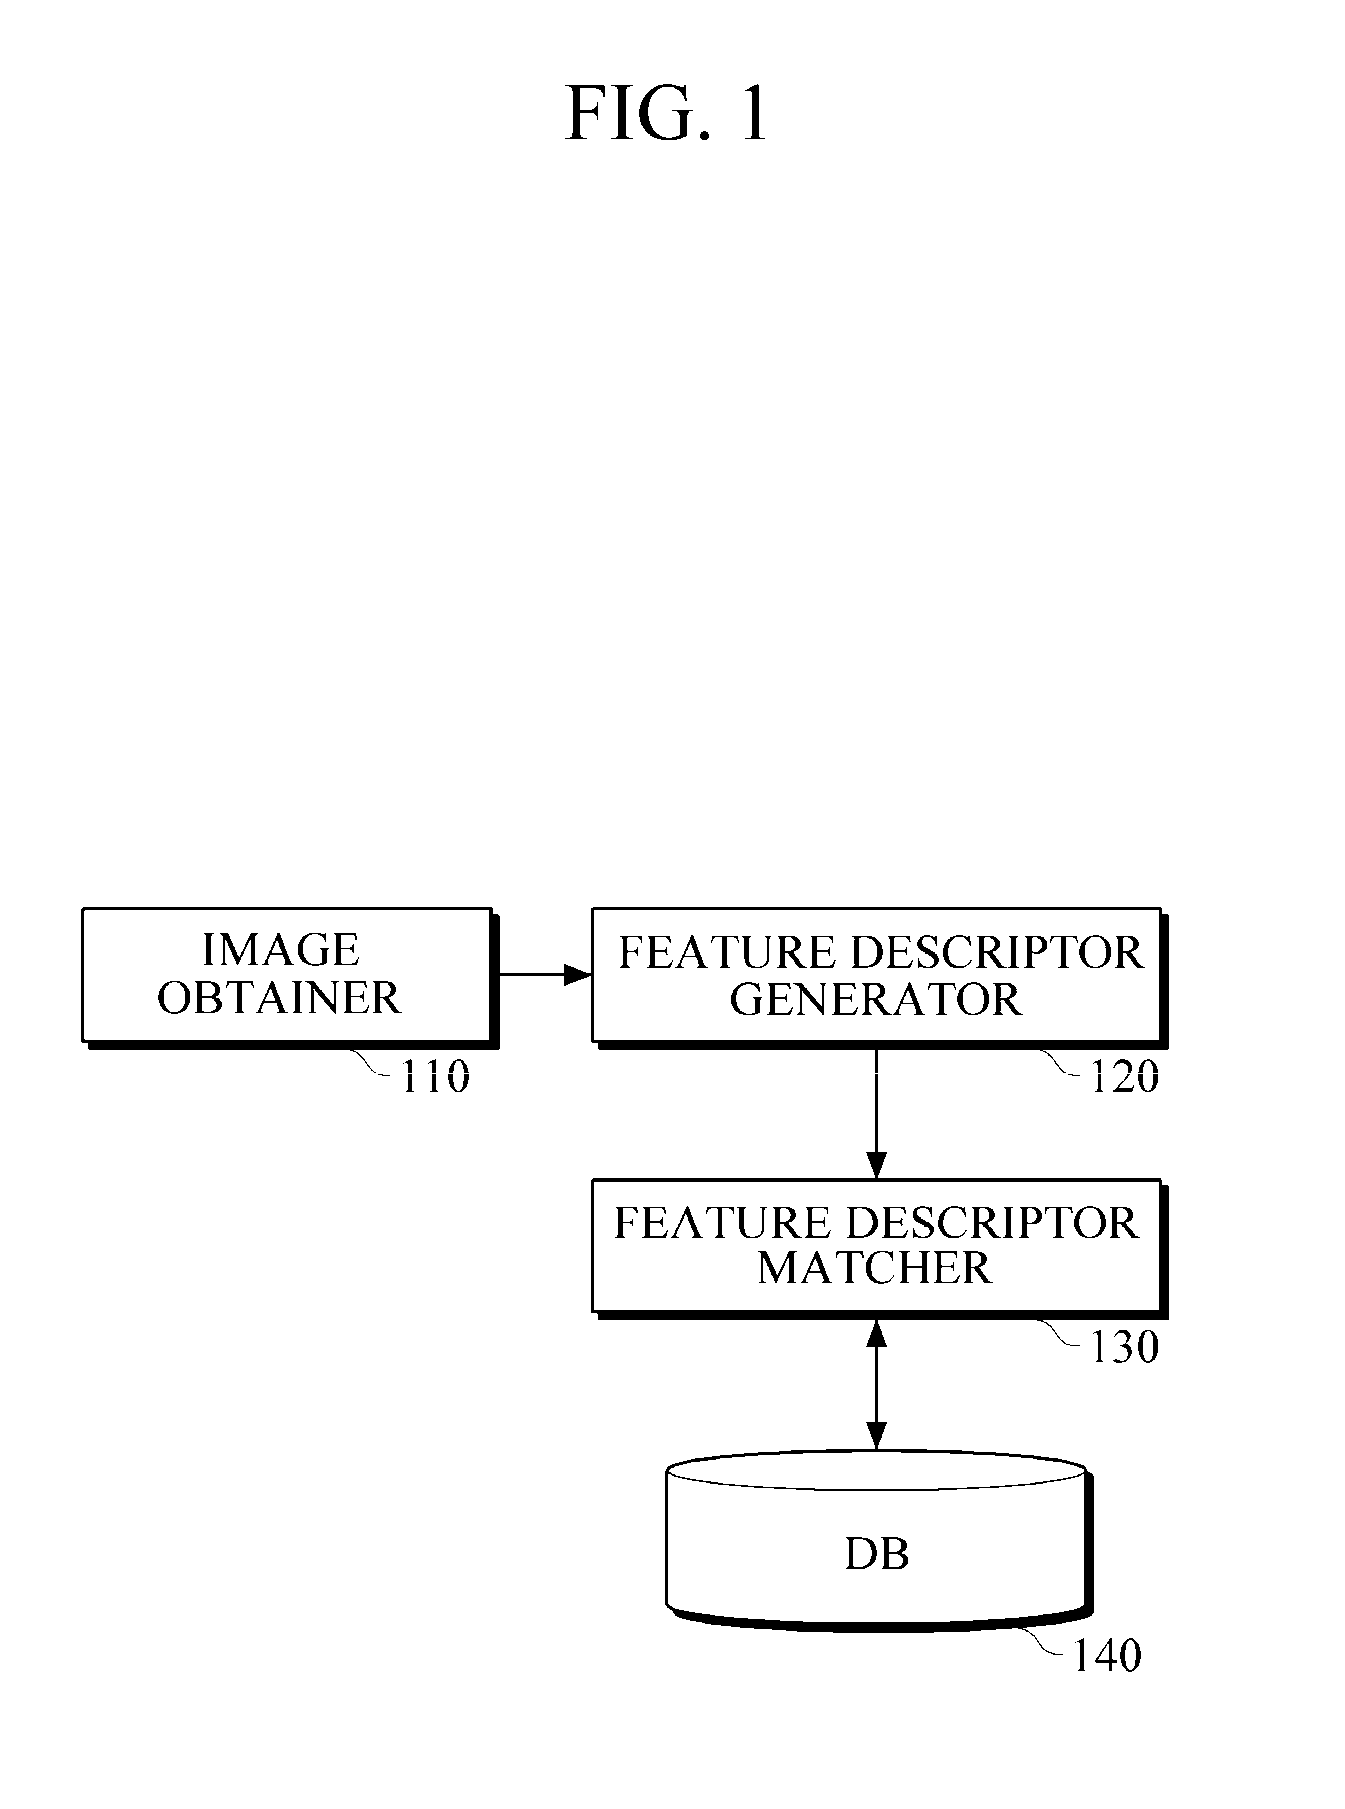 Image recognition apparatus and method using scalable compact local descriptor